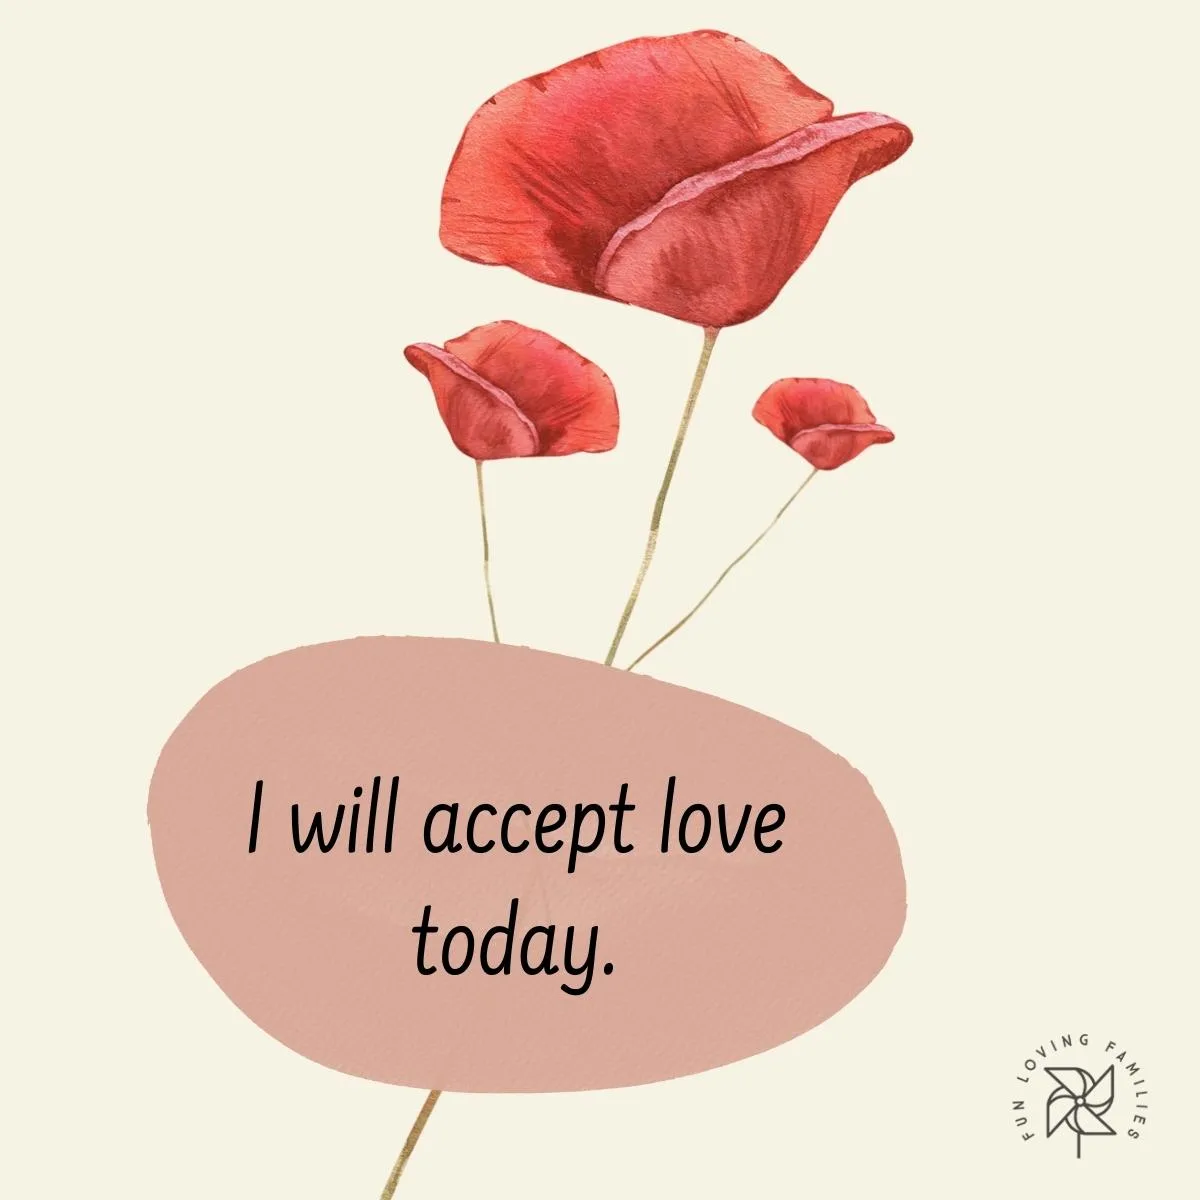 I will accept love today affirmation